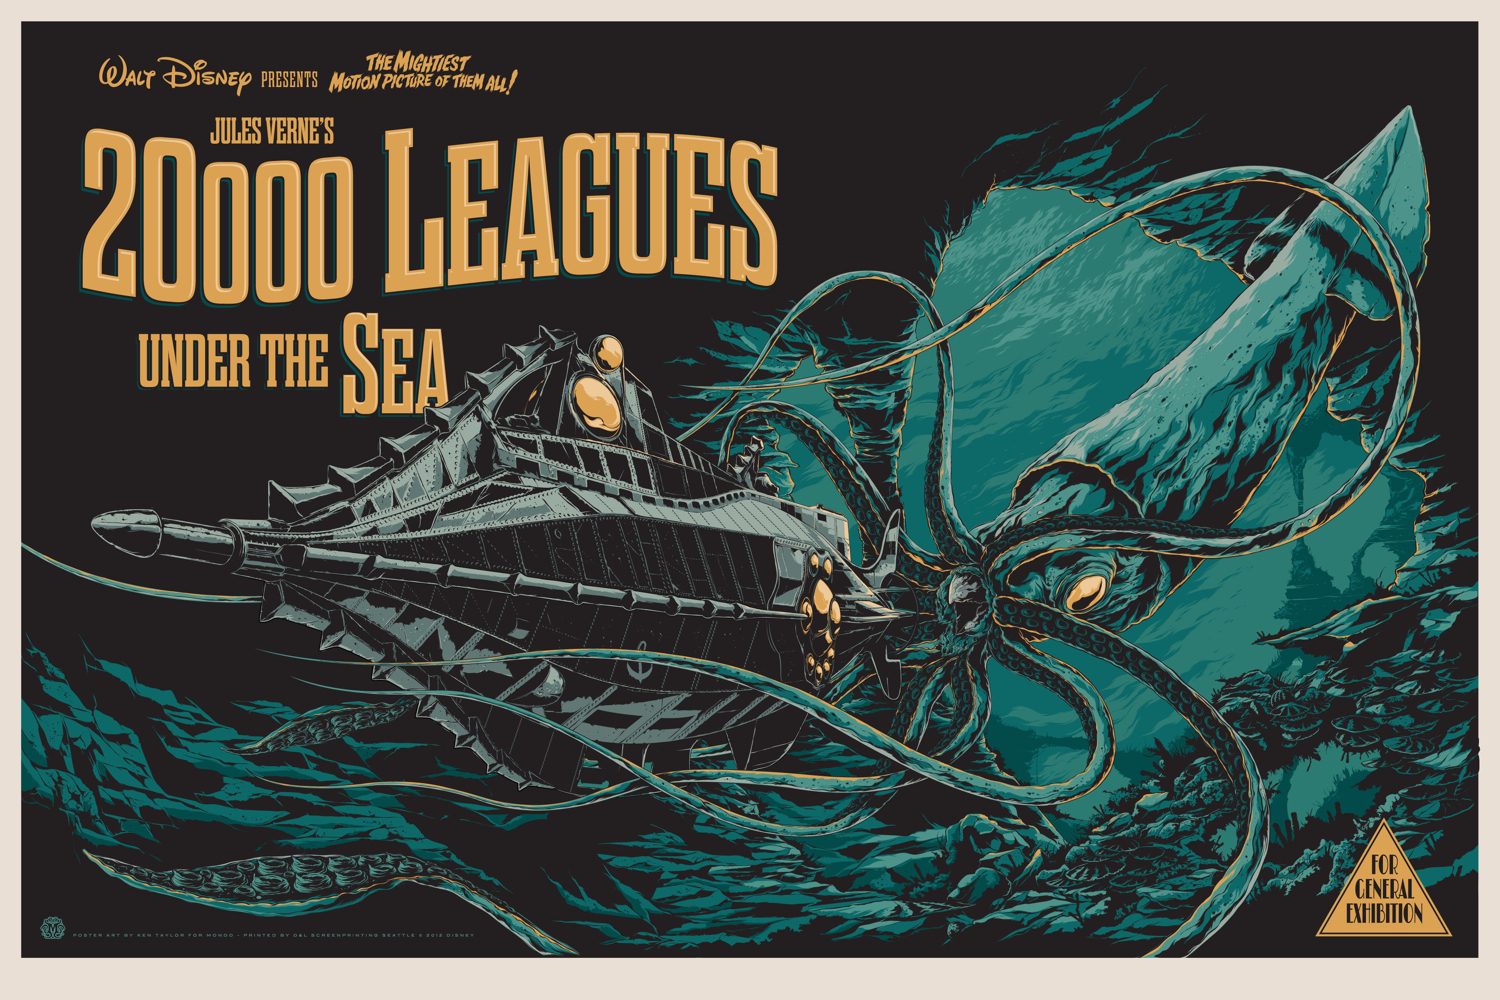 20000-leagues-under-the-sea-poster-kent-taylor.jpg